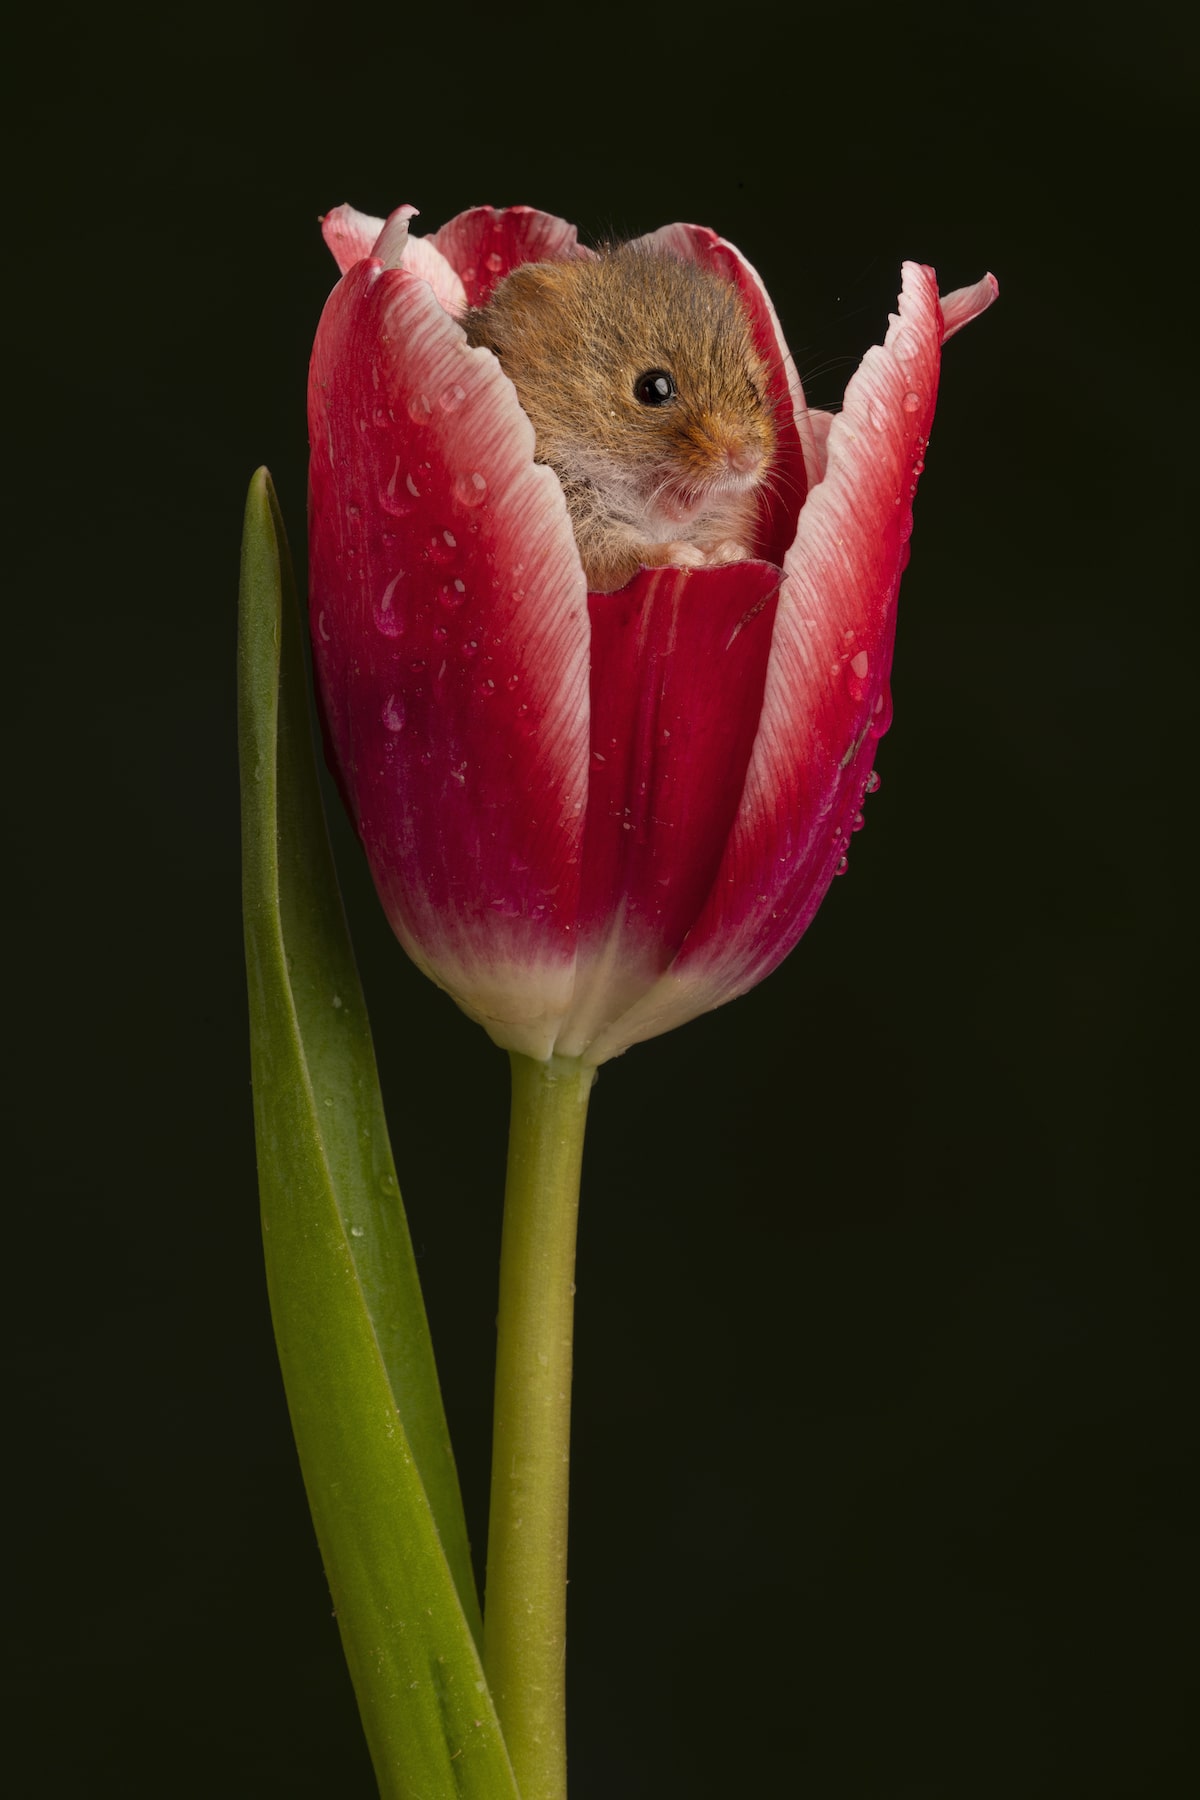 Harvest Mouse in a Tulip by Miles Herbert